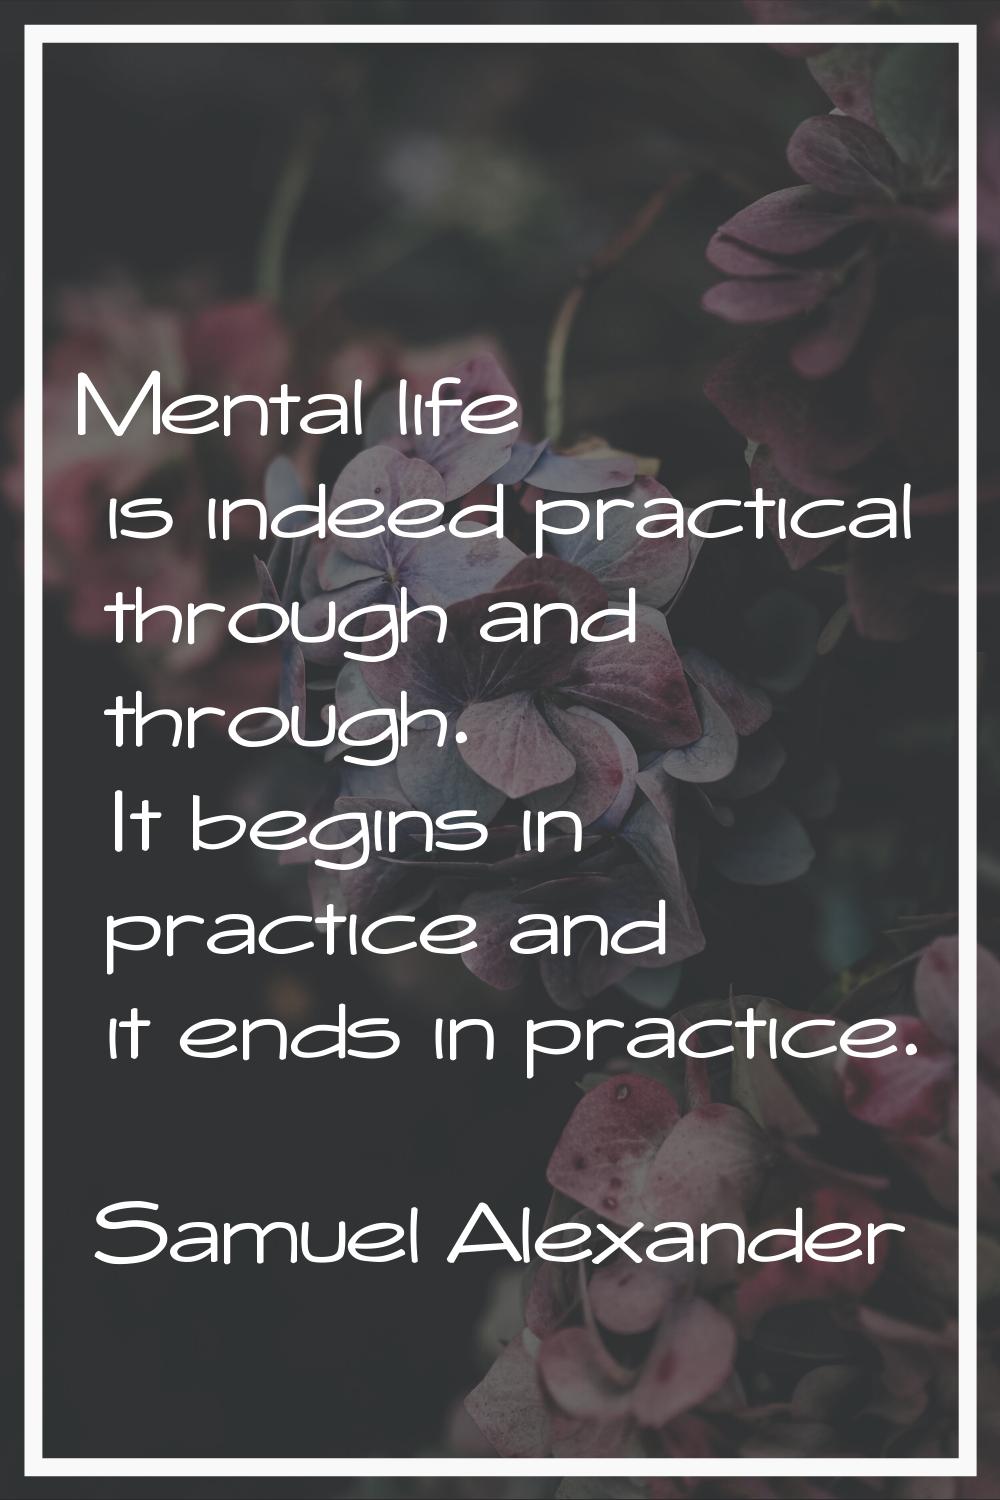 Mental life is indeed practical through and through. It begins in practice and it ends in practice.